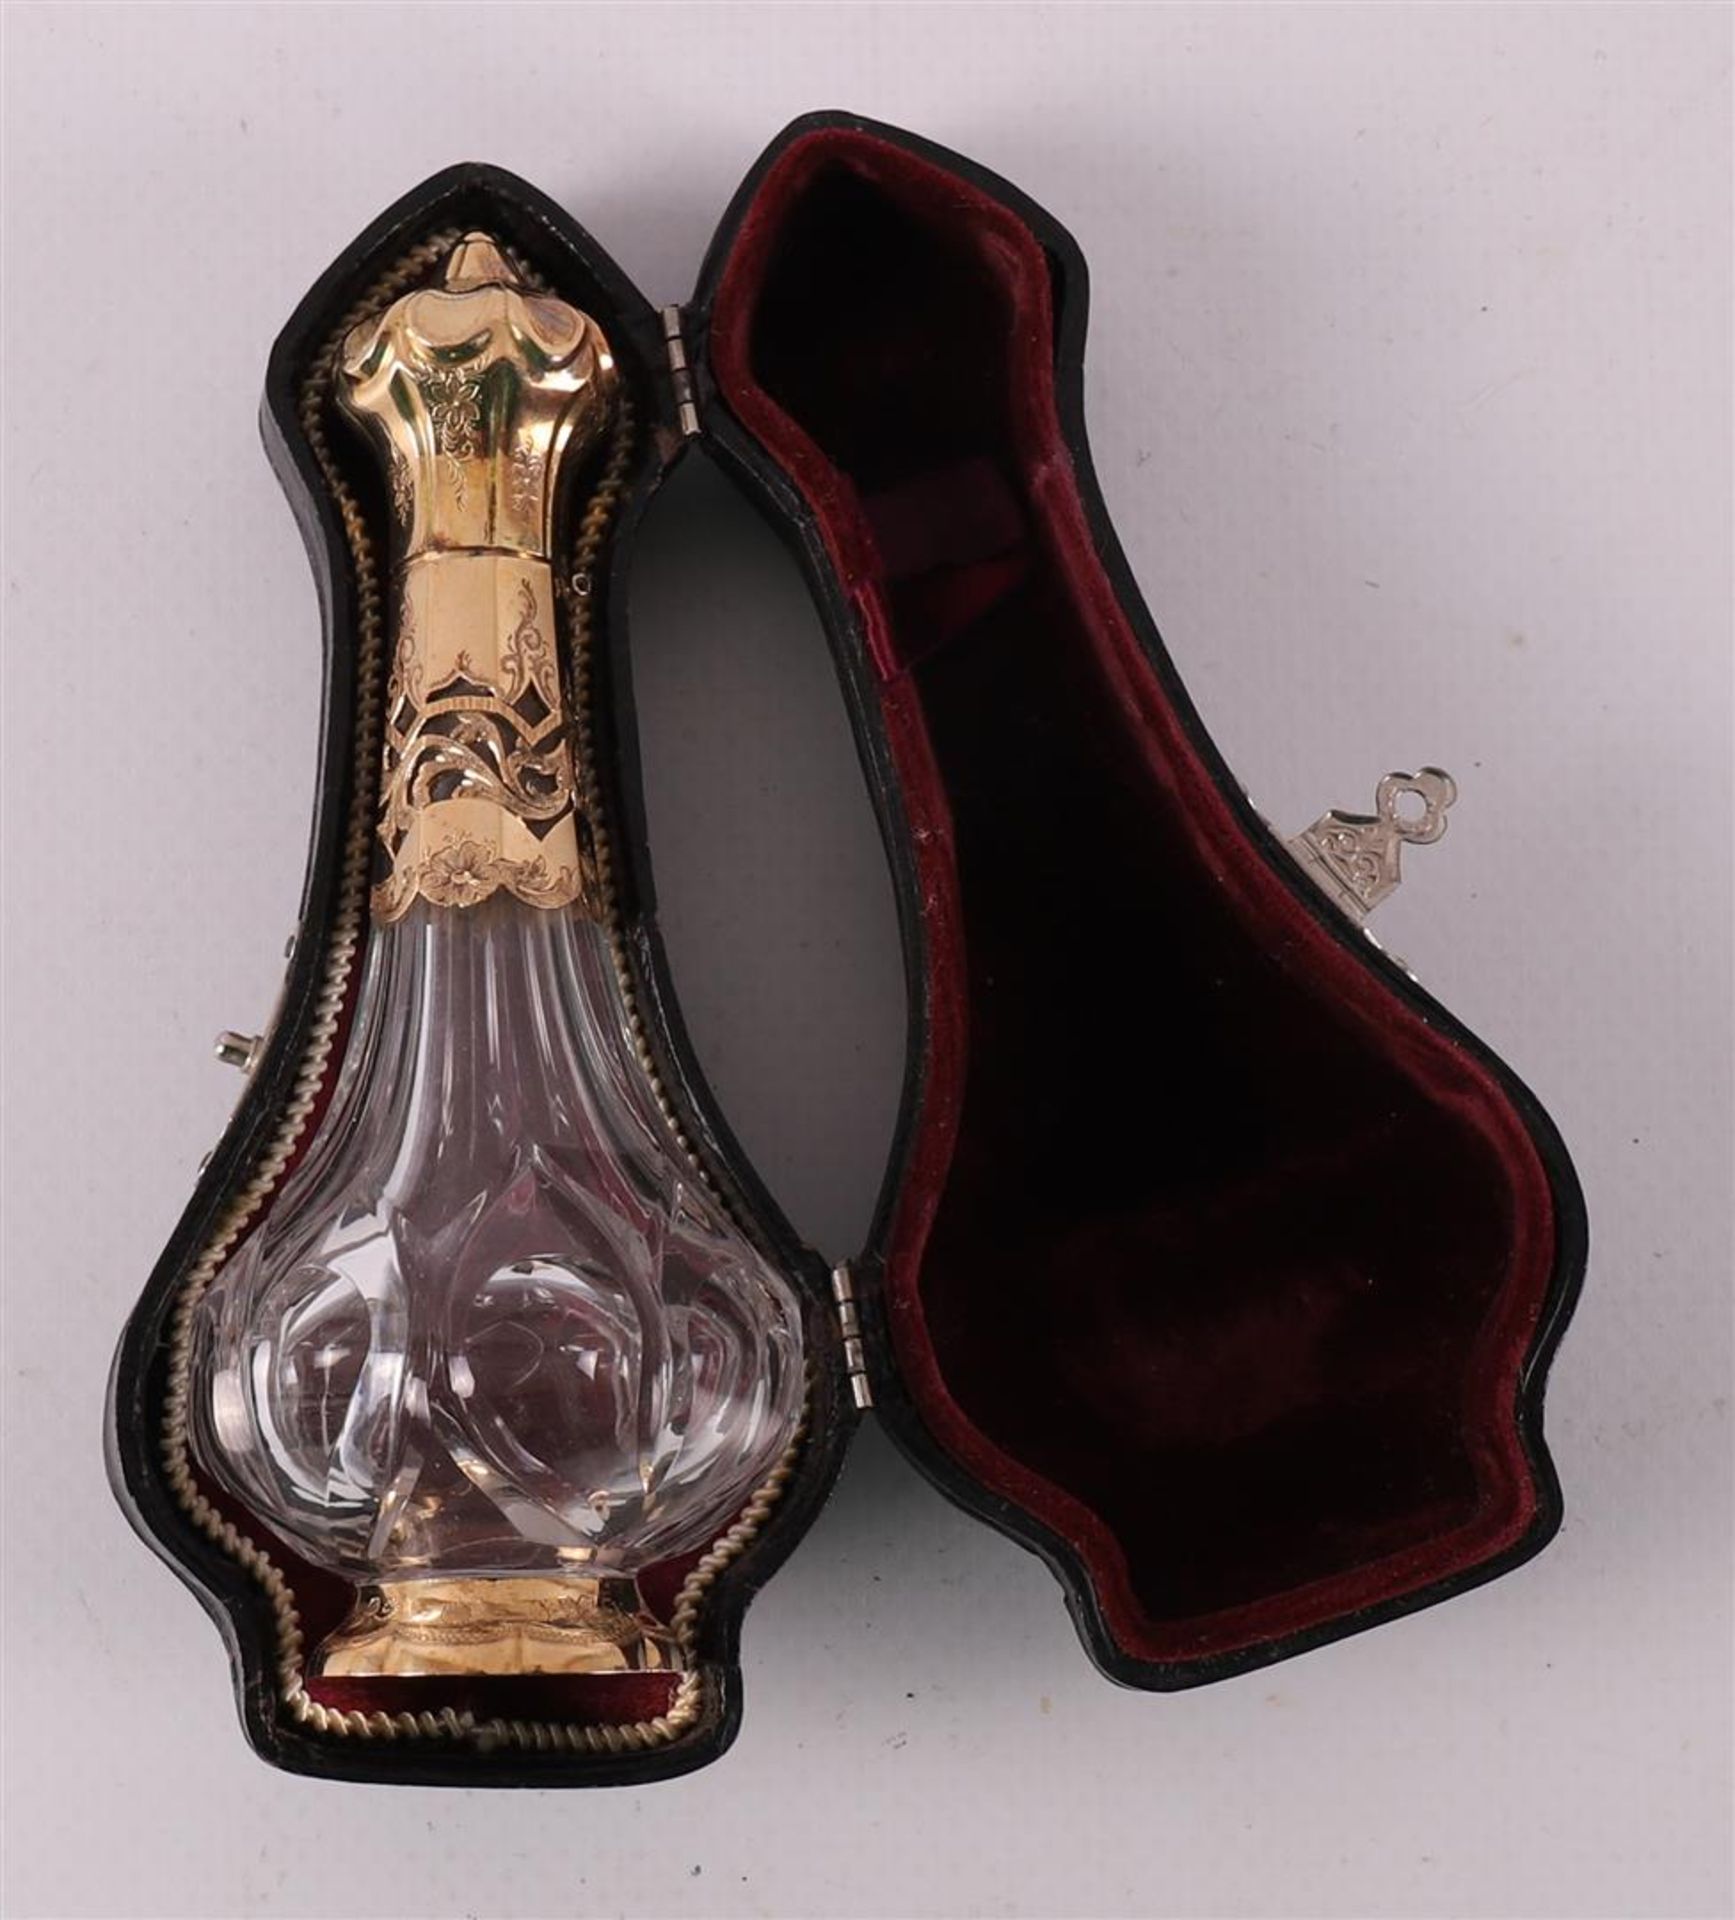 A clear crystal odor flask with gold lid and frame, 19th century.